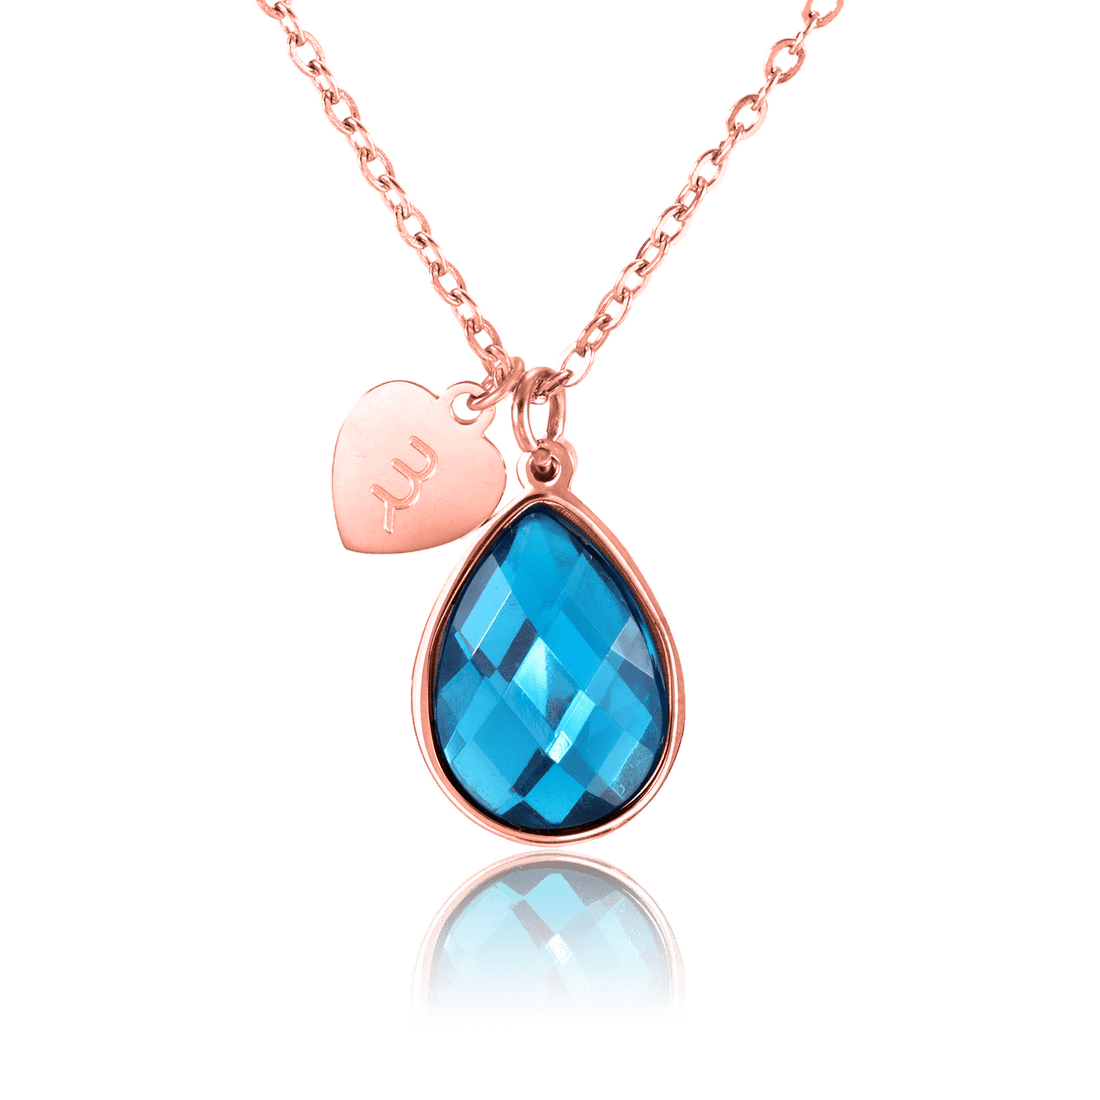 bianco rosso Necklaces Gold March Birthstone - Aquamarine cyprus greece jewelry gift free shipping europe worldwide